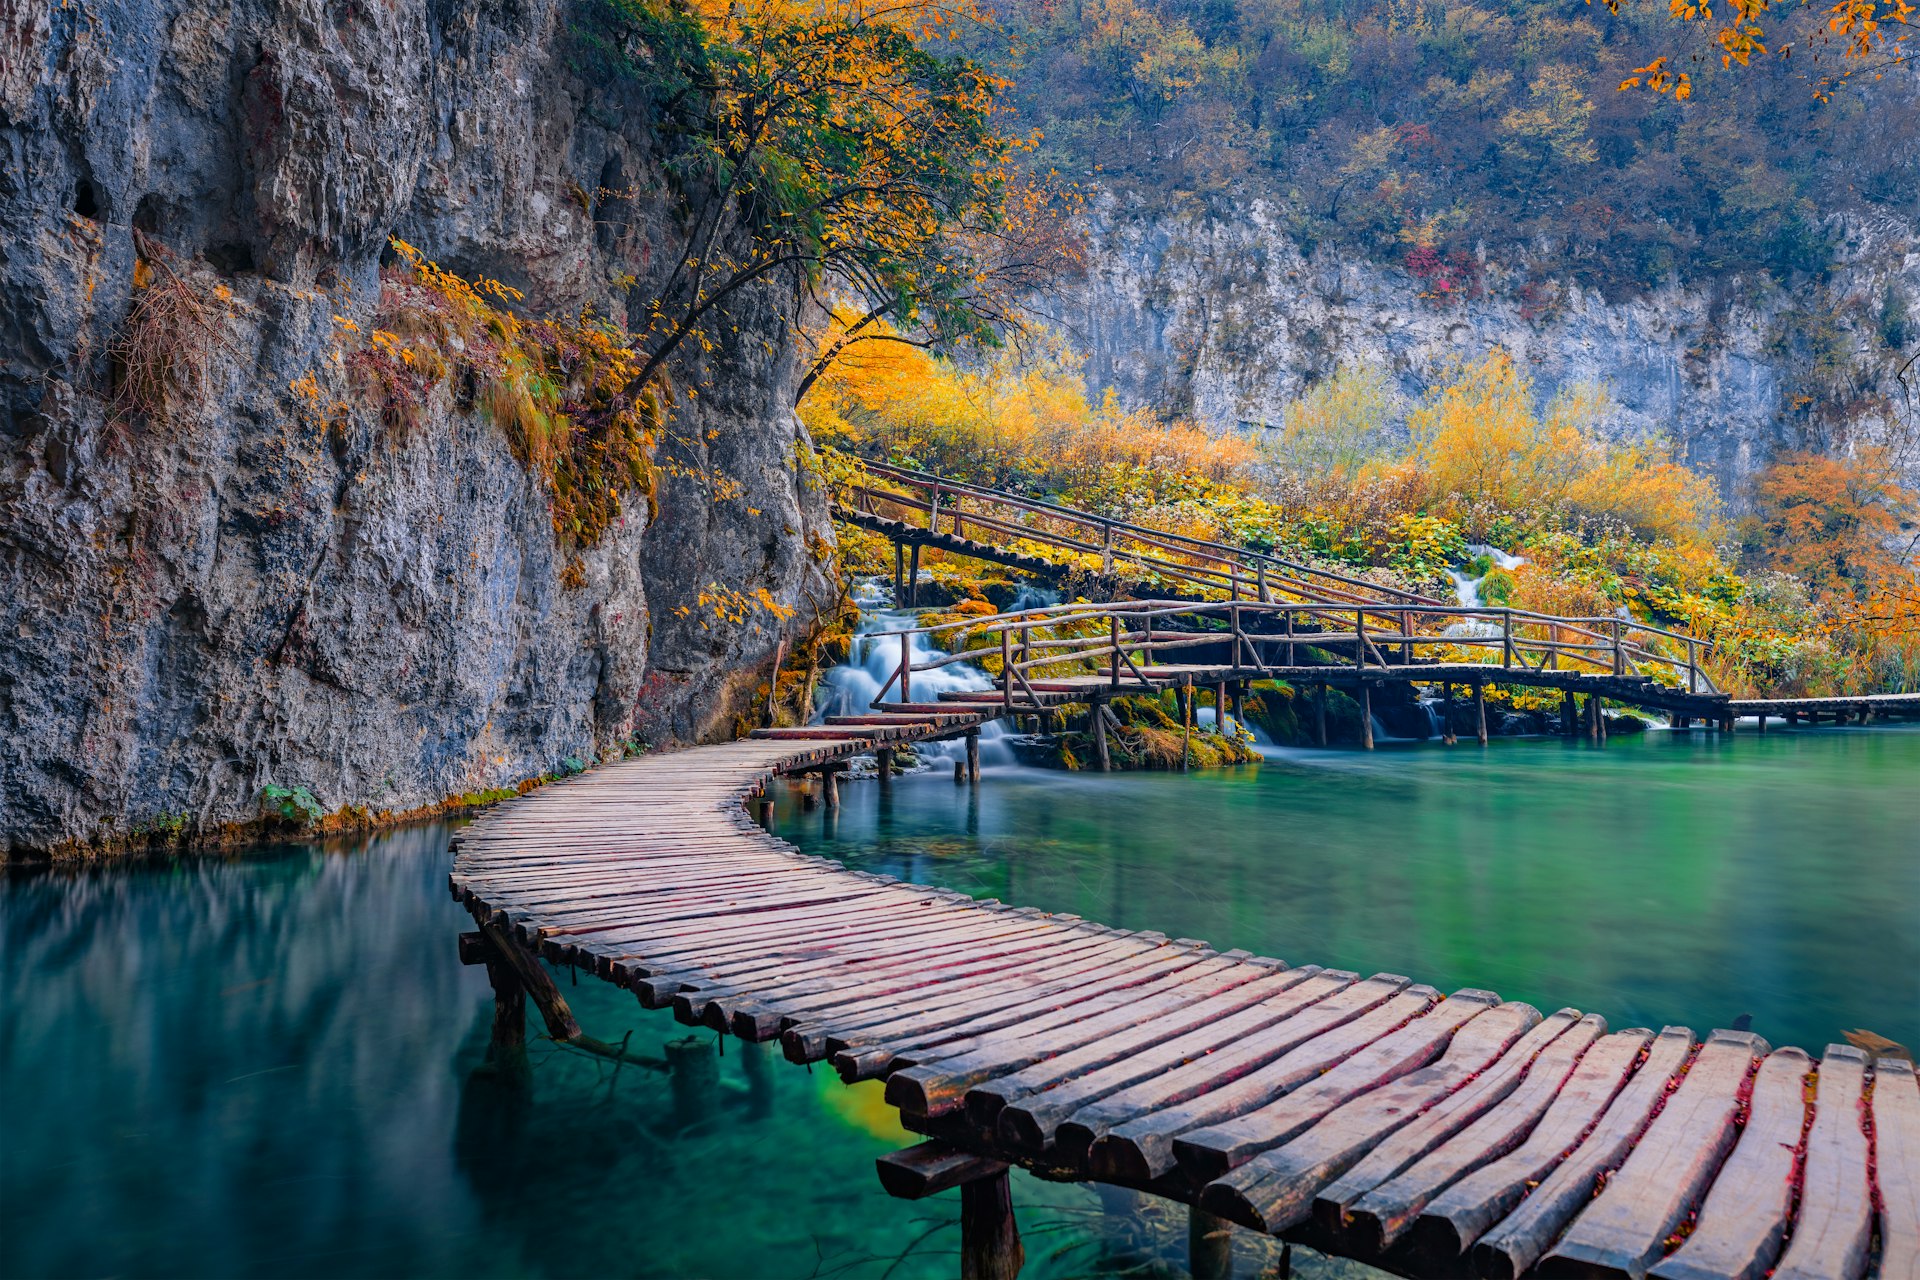 A view of wooden walkway by waterfalls in autumn, Plitvice National Park, Croatia